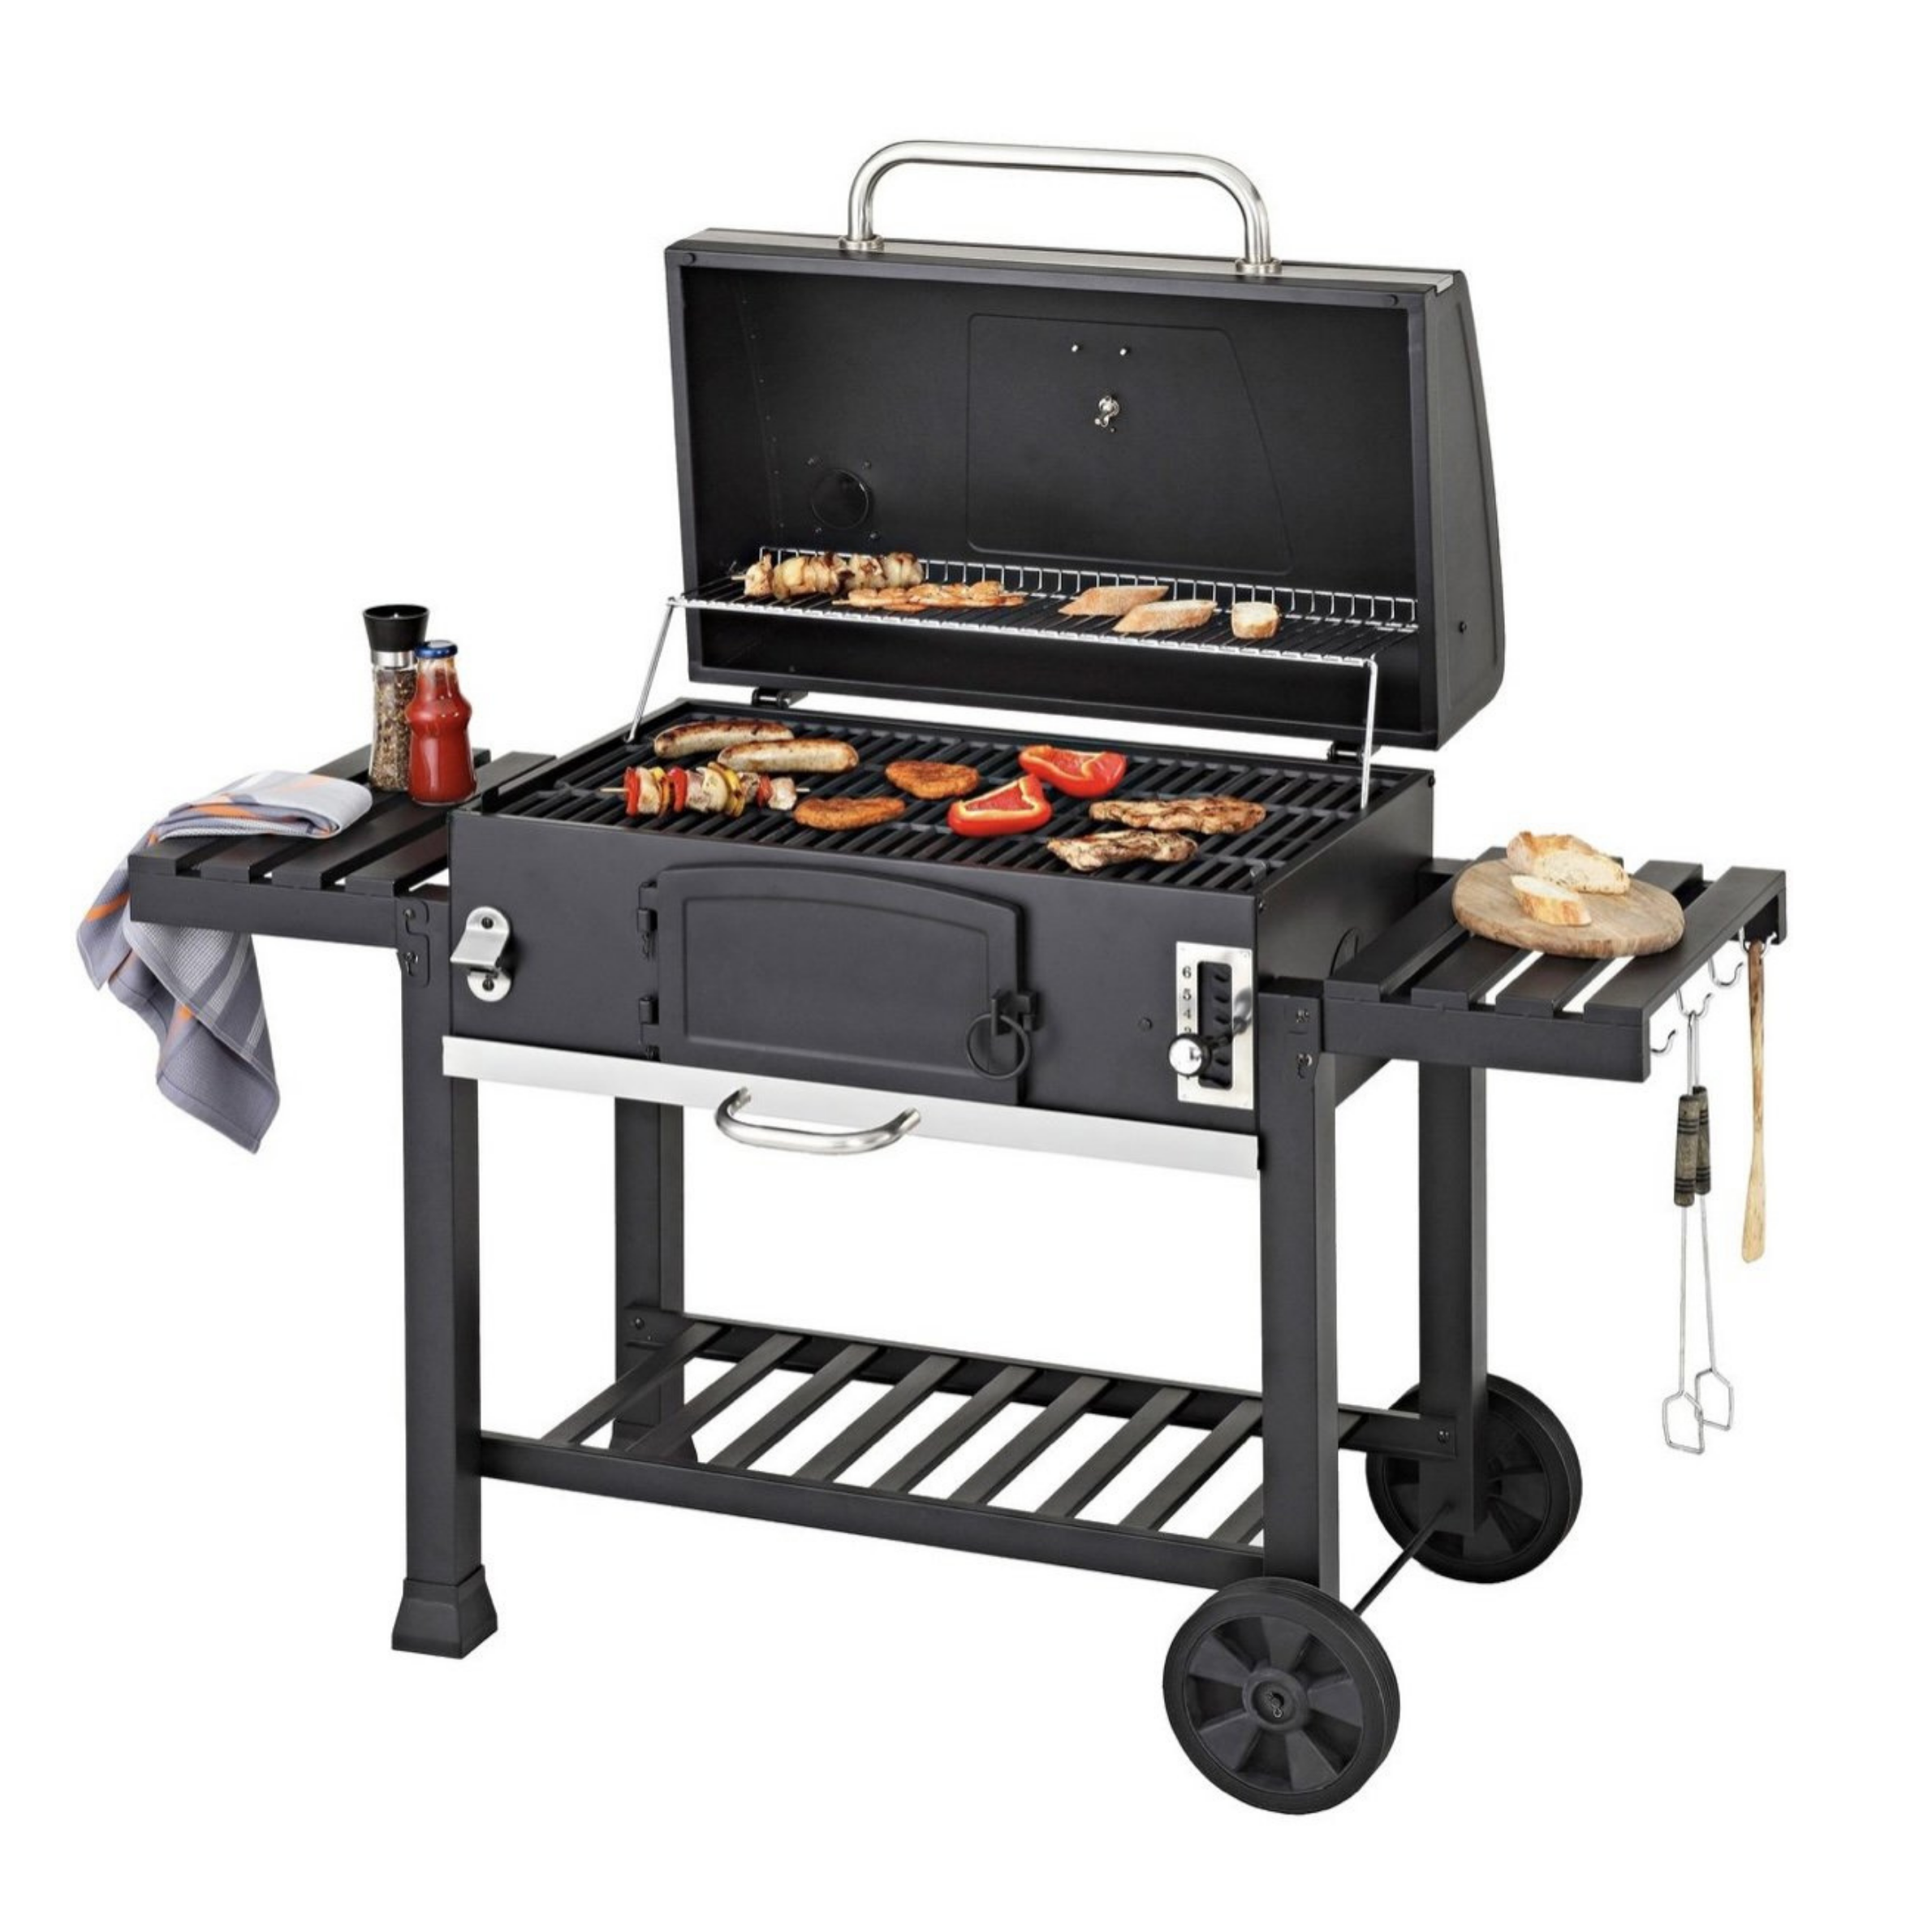 XXL Smoker Charcoal Barbecue + Cover - CosmoGrill